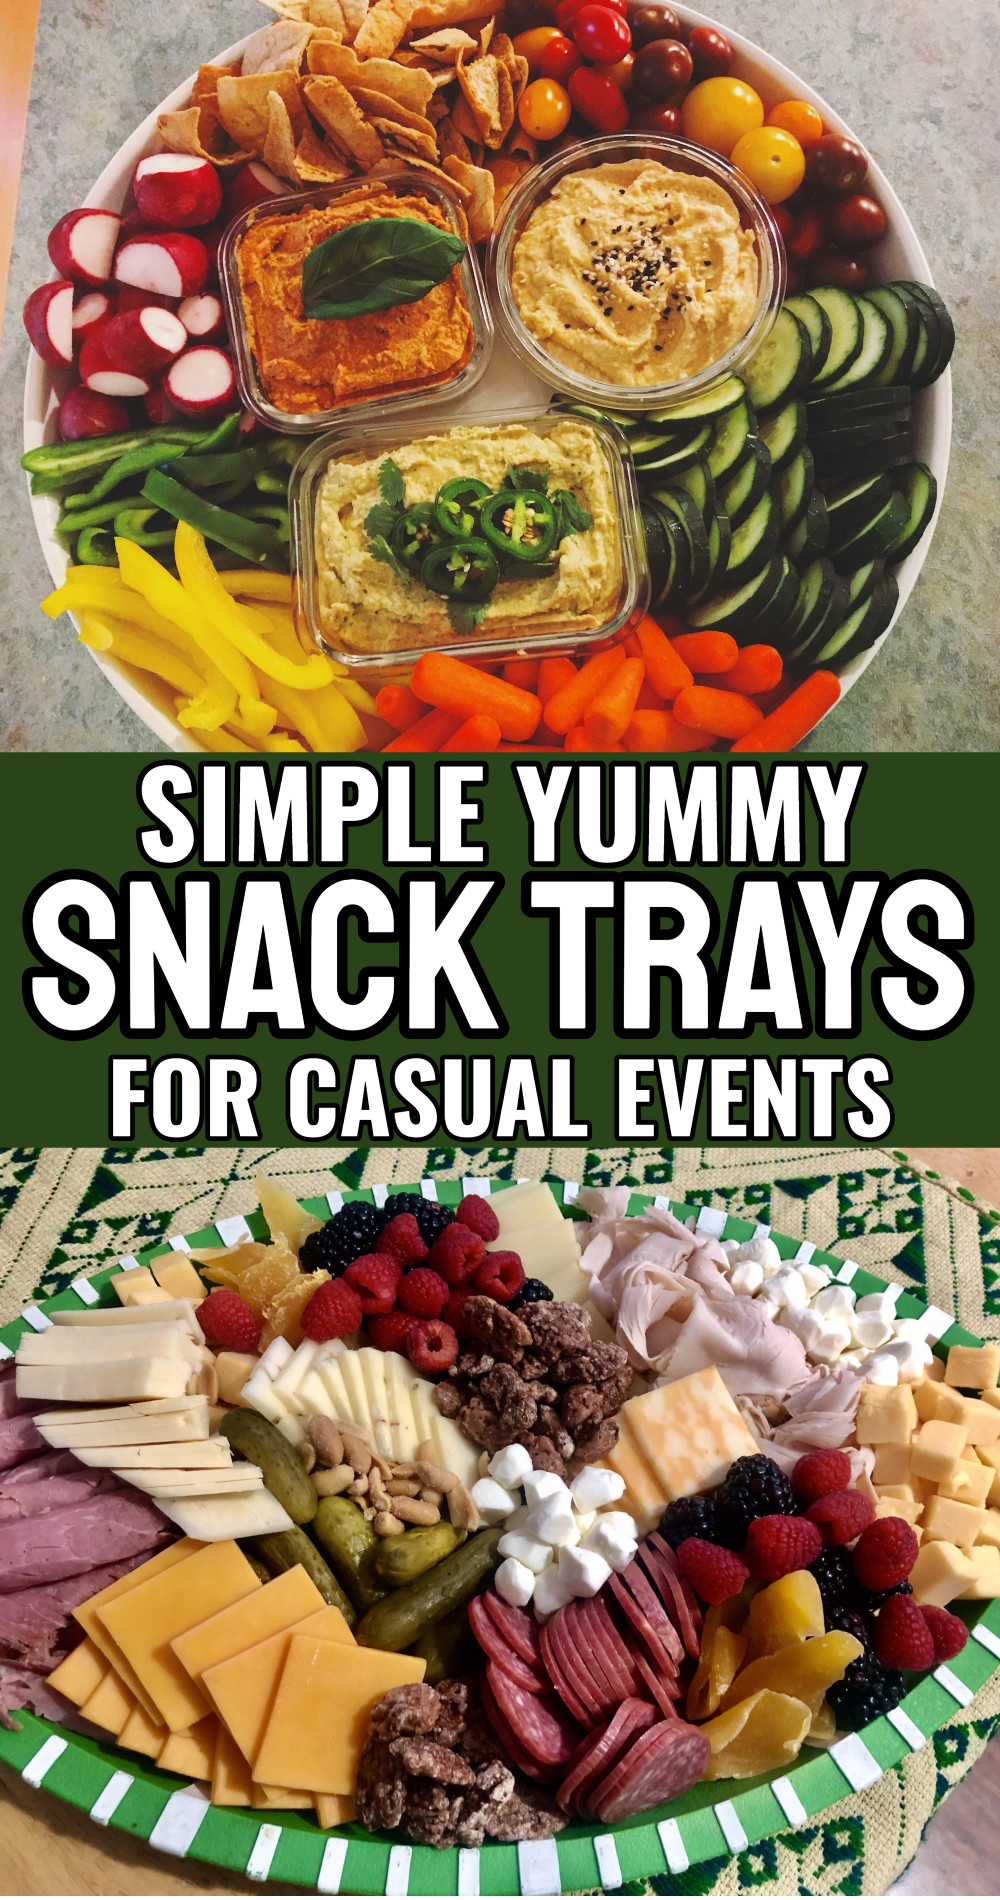 Simple Yummy Snack Trays For Casual Events